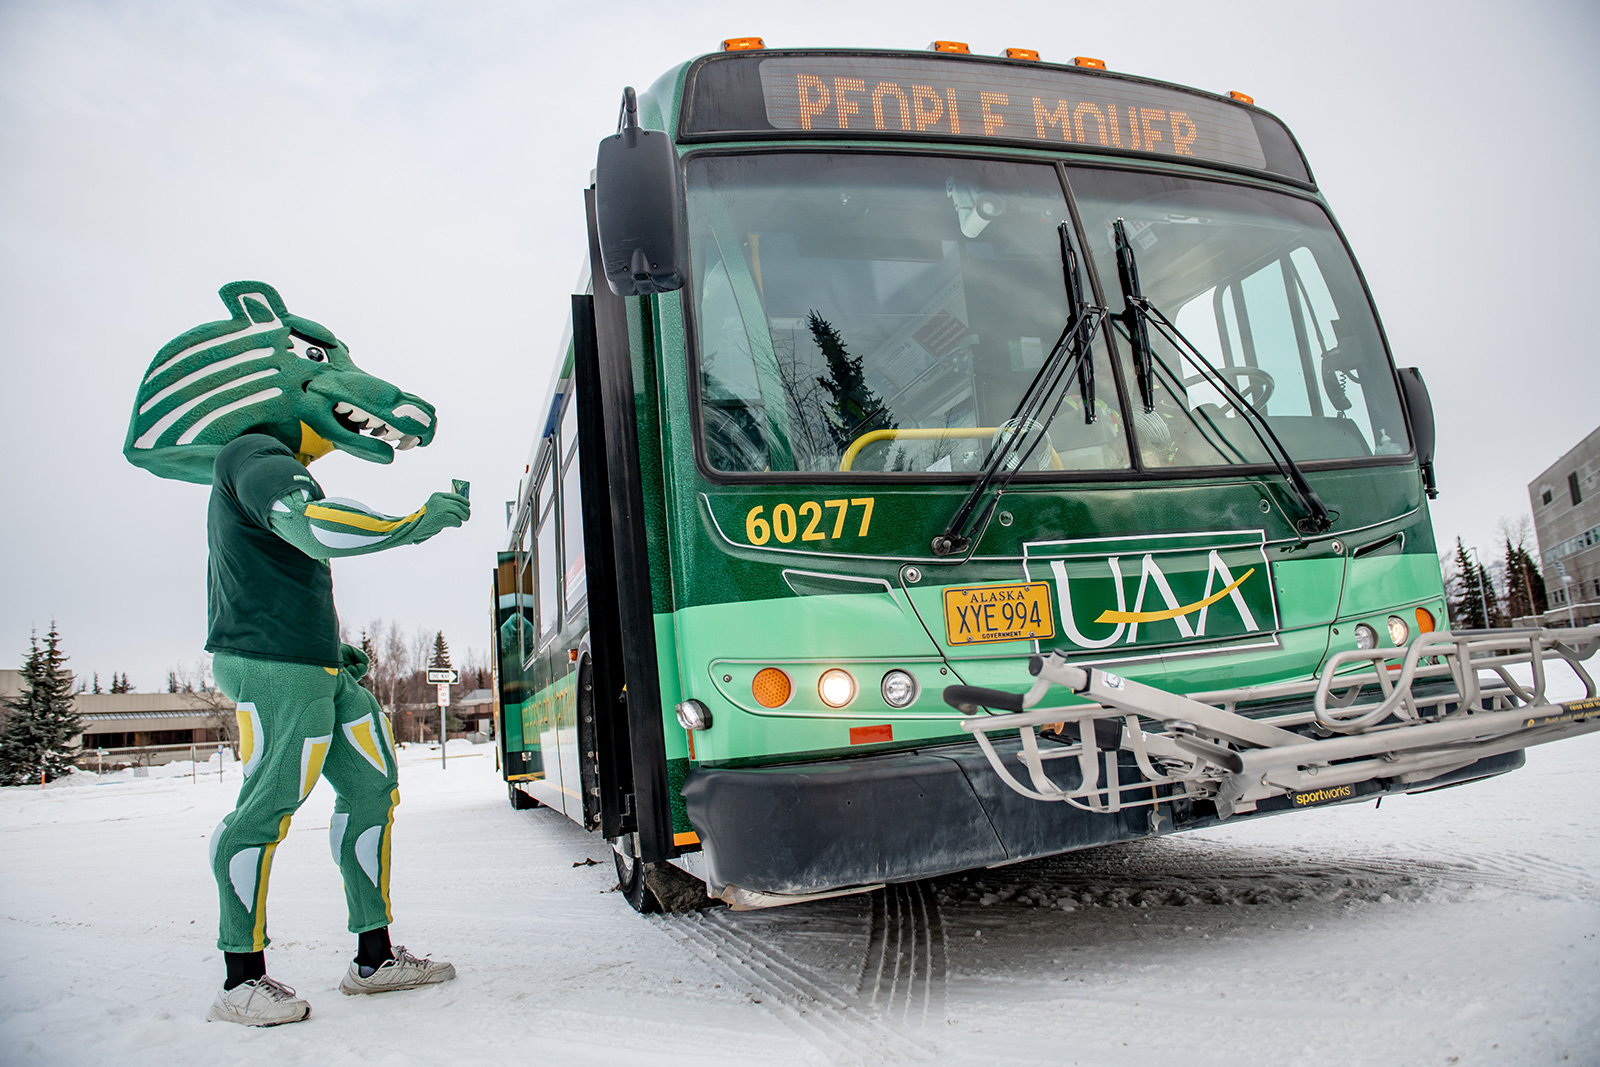 Spirit the Seawolf getting on a People Mover bus in the winter.